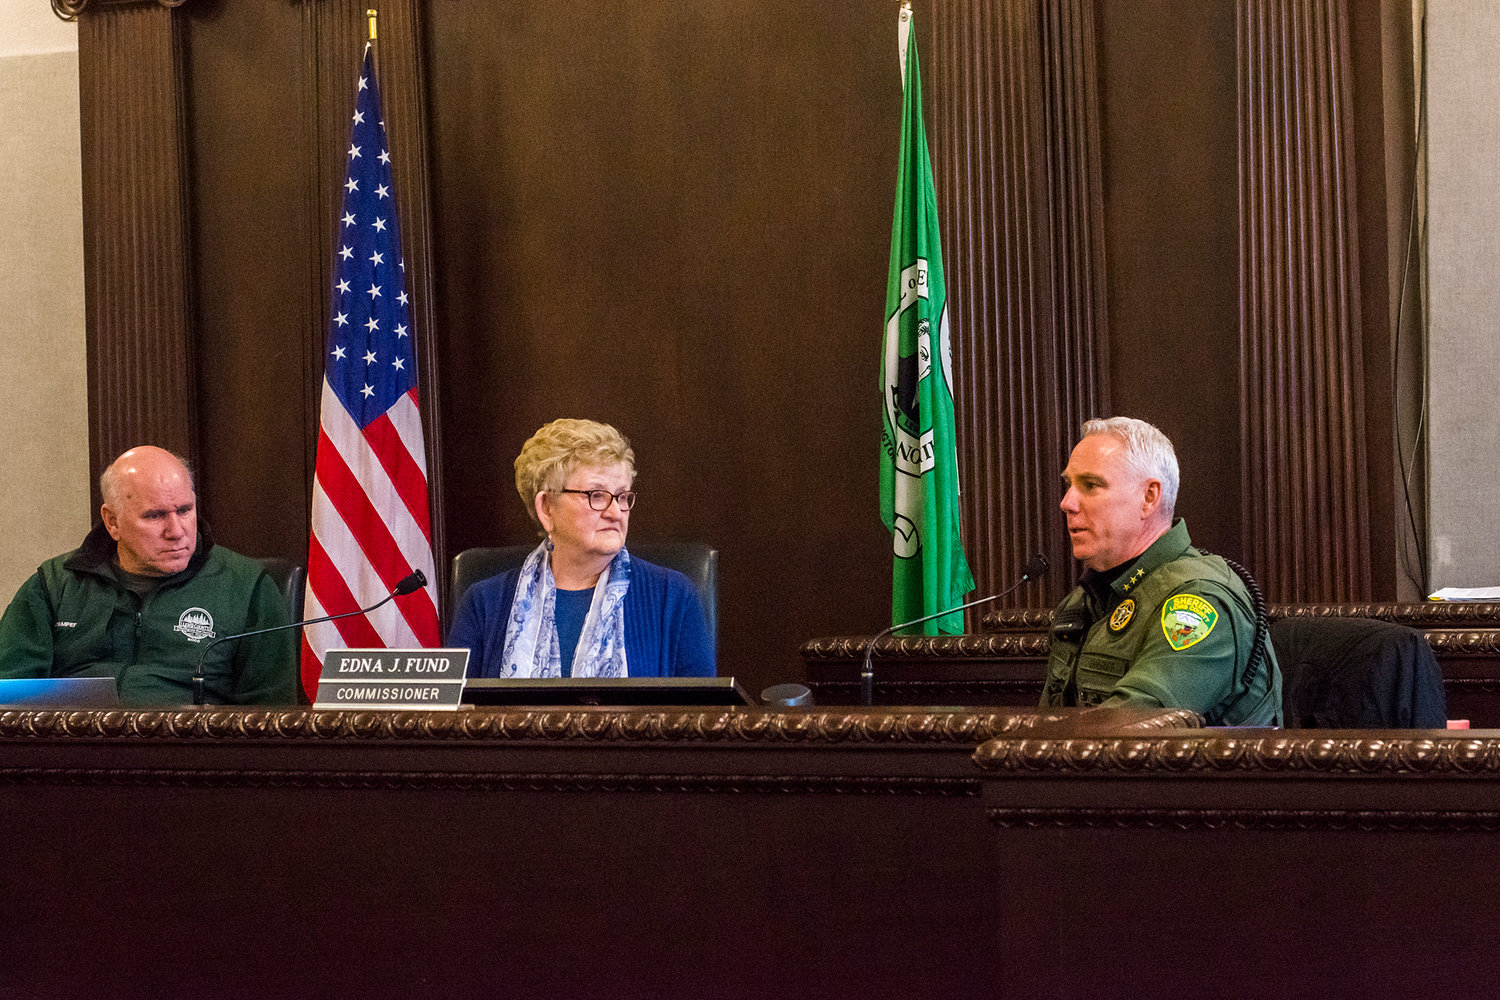 Lewis County sheriff Rob Snaza, right, speaks on Initiative 1639 as commissioners Gary Stamper and Edna Fund look on.